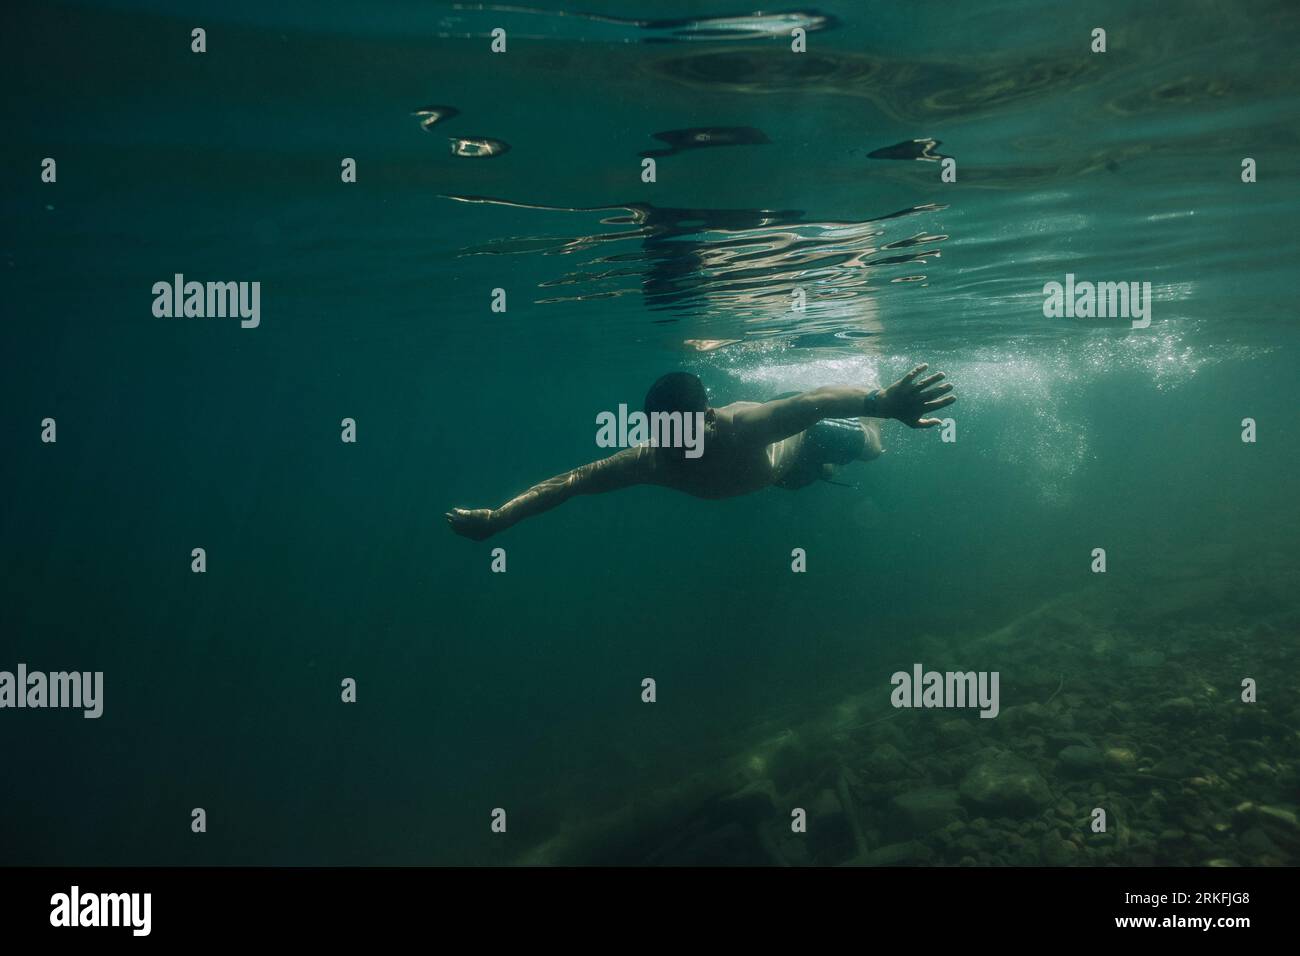 A young male dives underwater in a lake. Stock Photo